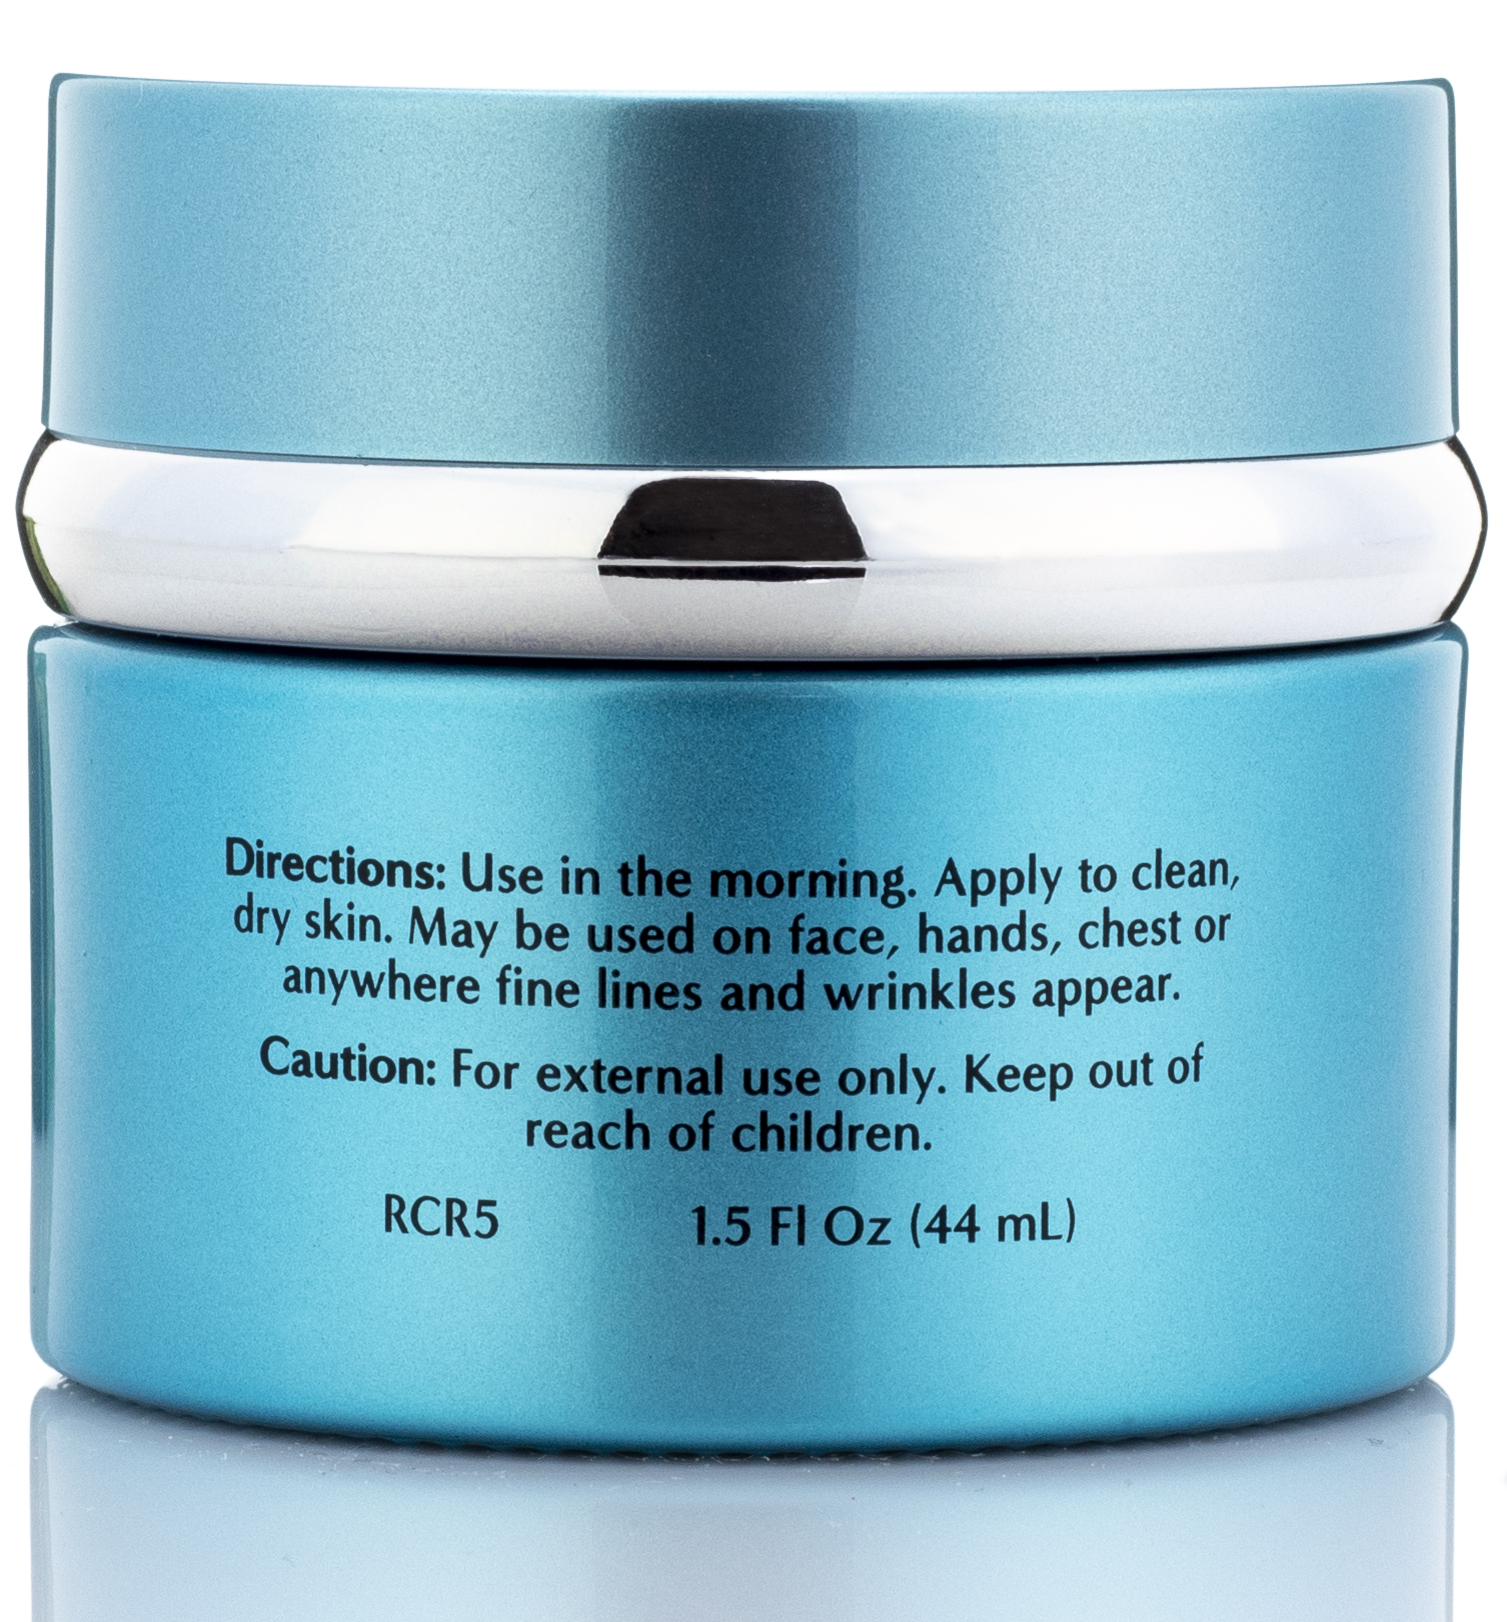 Reventin Clinical Results Collagen Cream Targets Wrinkles, Lines, and Texture. Firming Facial Moisturizer with Peptides. 1.5 fl oz - image 2 of 4